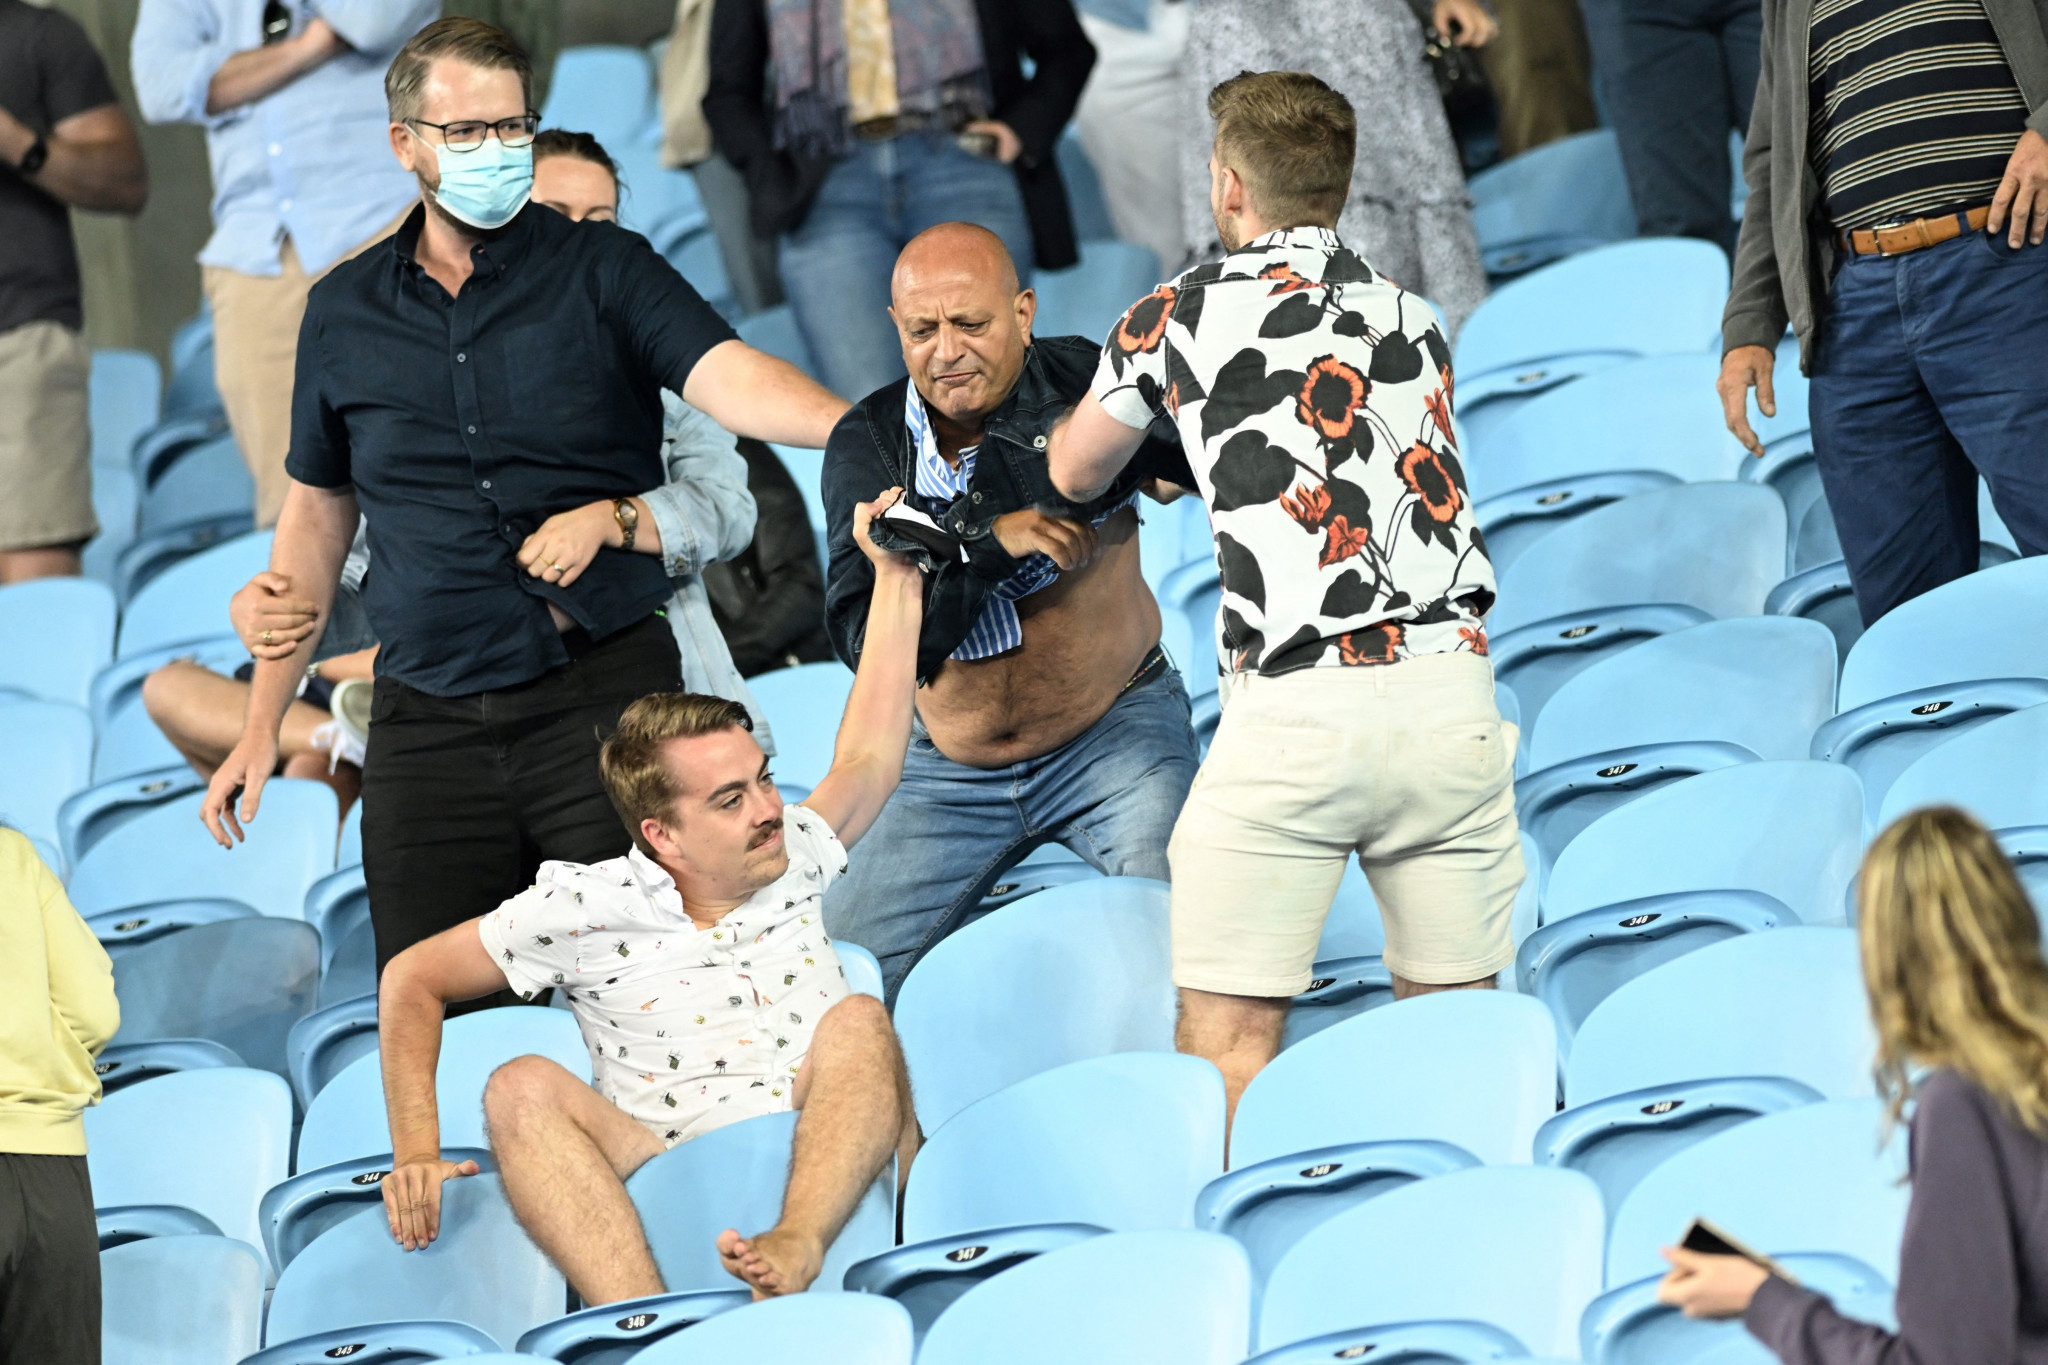 Although capacity has been capped at 50 per cent due to COVID-19 fears, a fight broke out in the stands in Melbourne ©Getty Images